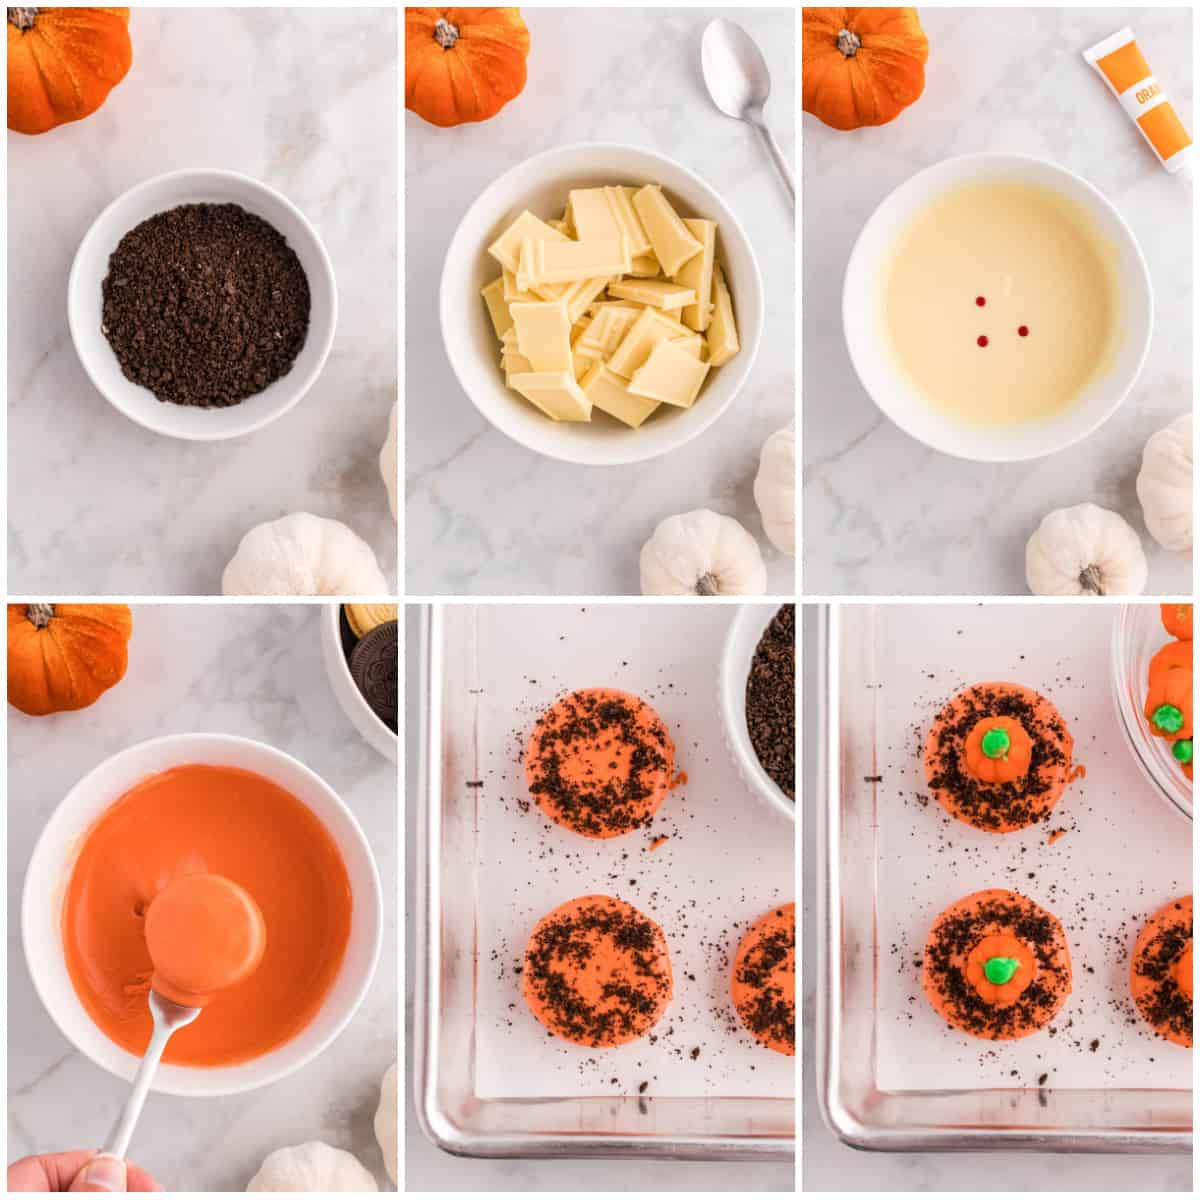 Step by step photos on how to make Pumpkin Patch Cookies.